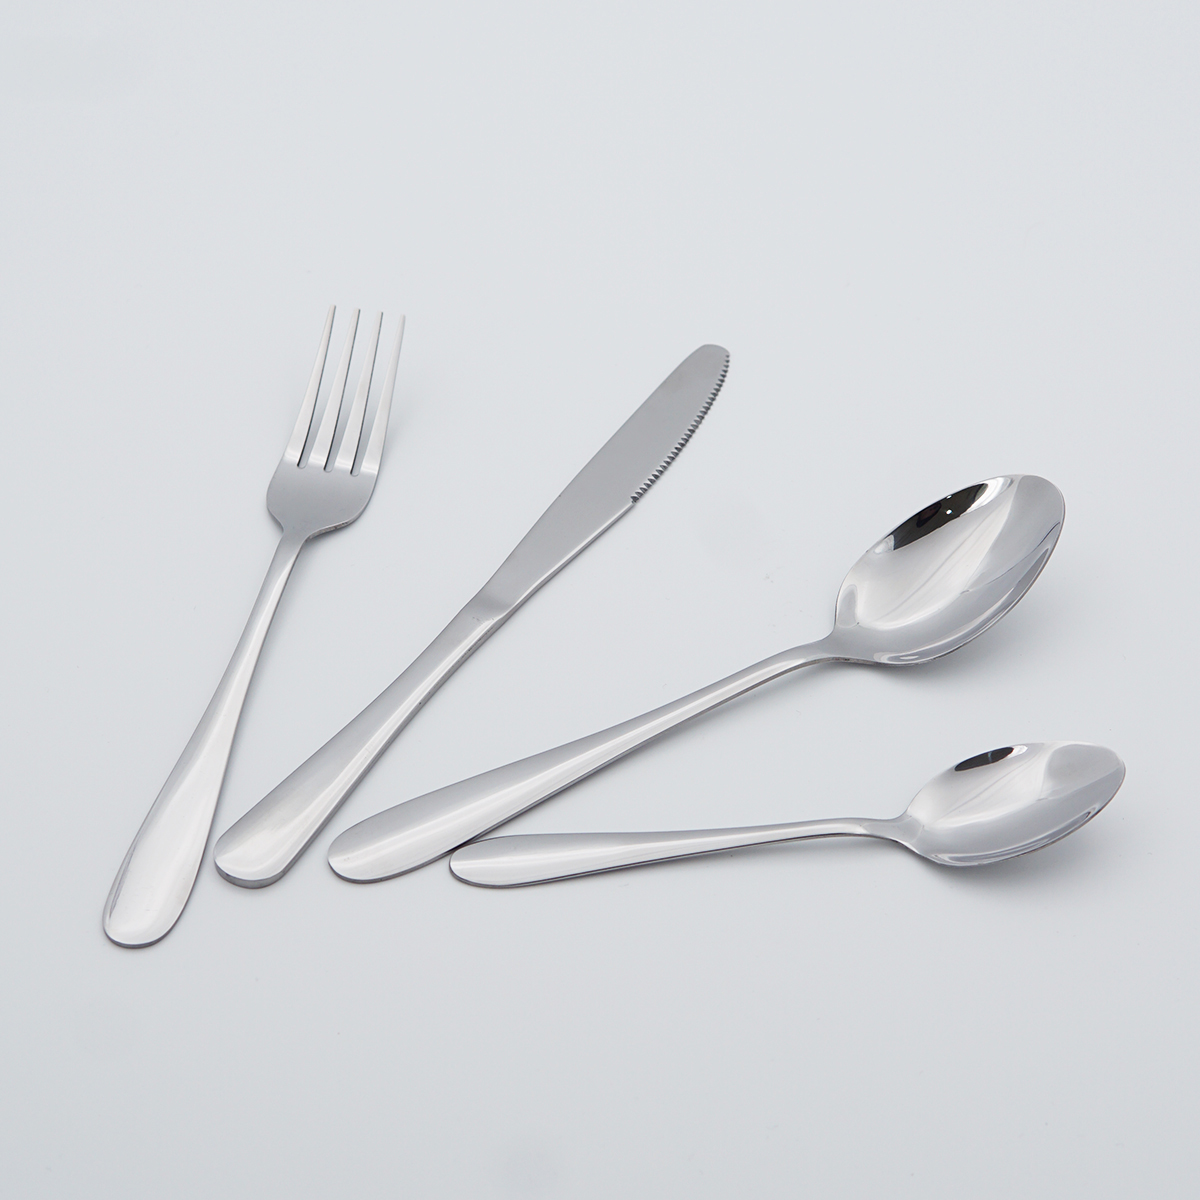 Wholesale Food Grade Silverware Spoons Forks and Knives for Events 18/8 Stainless Steel Flatware Set